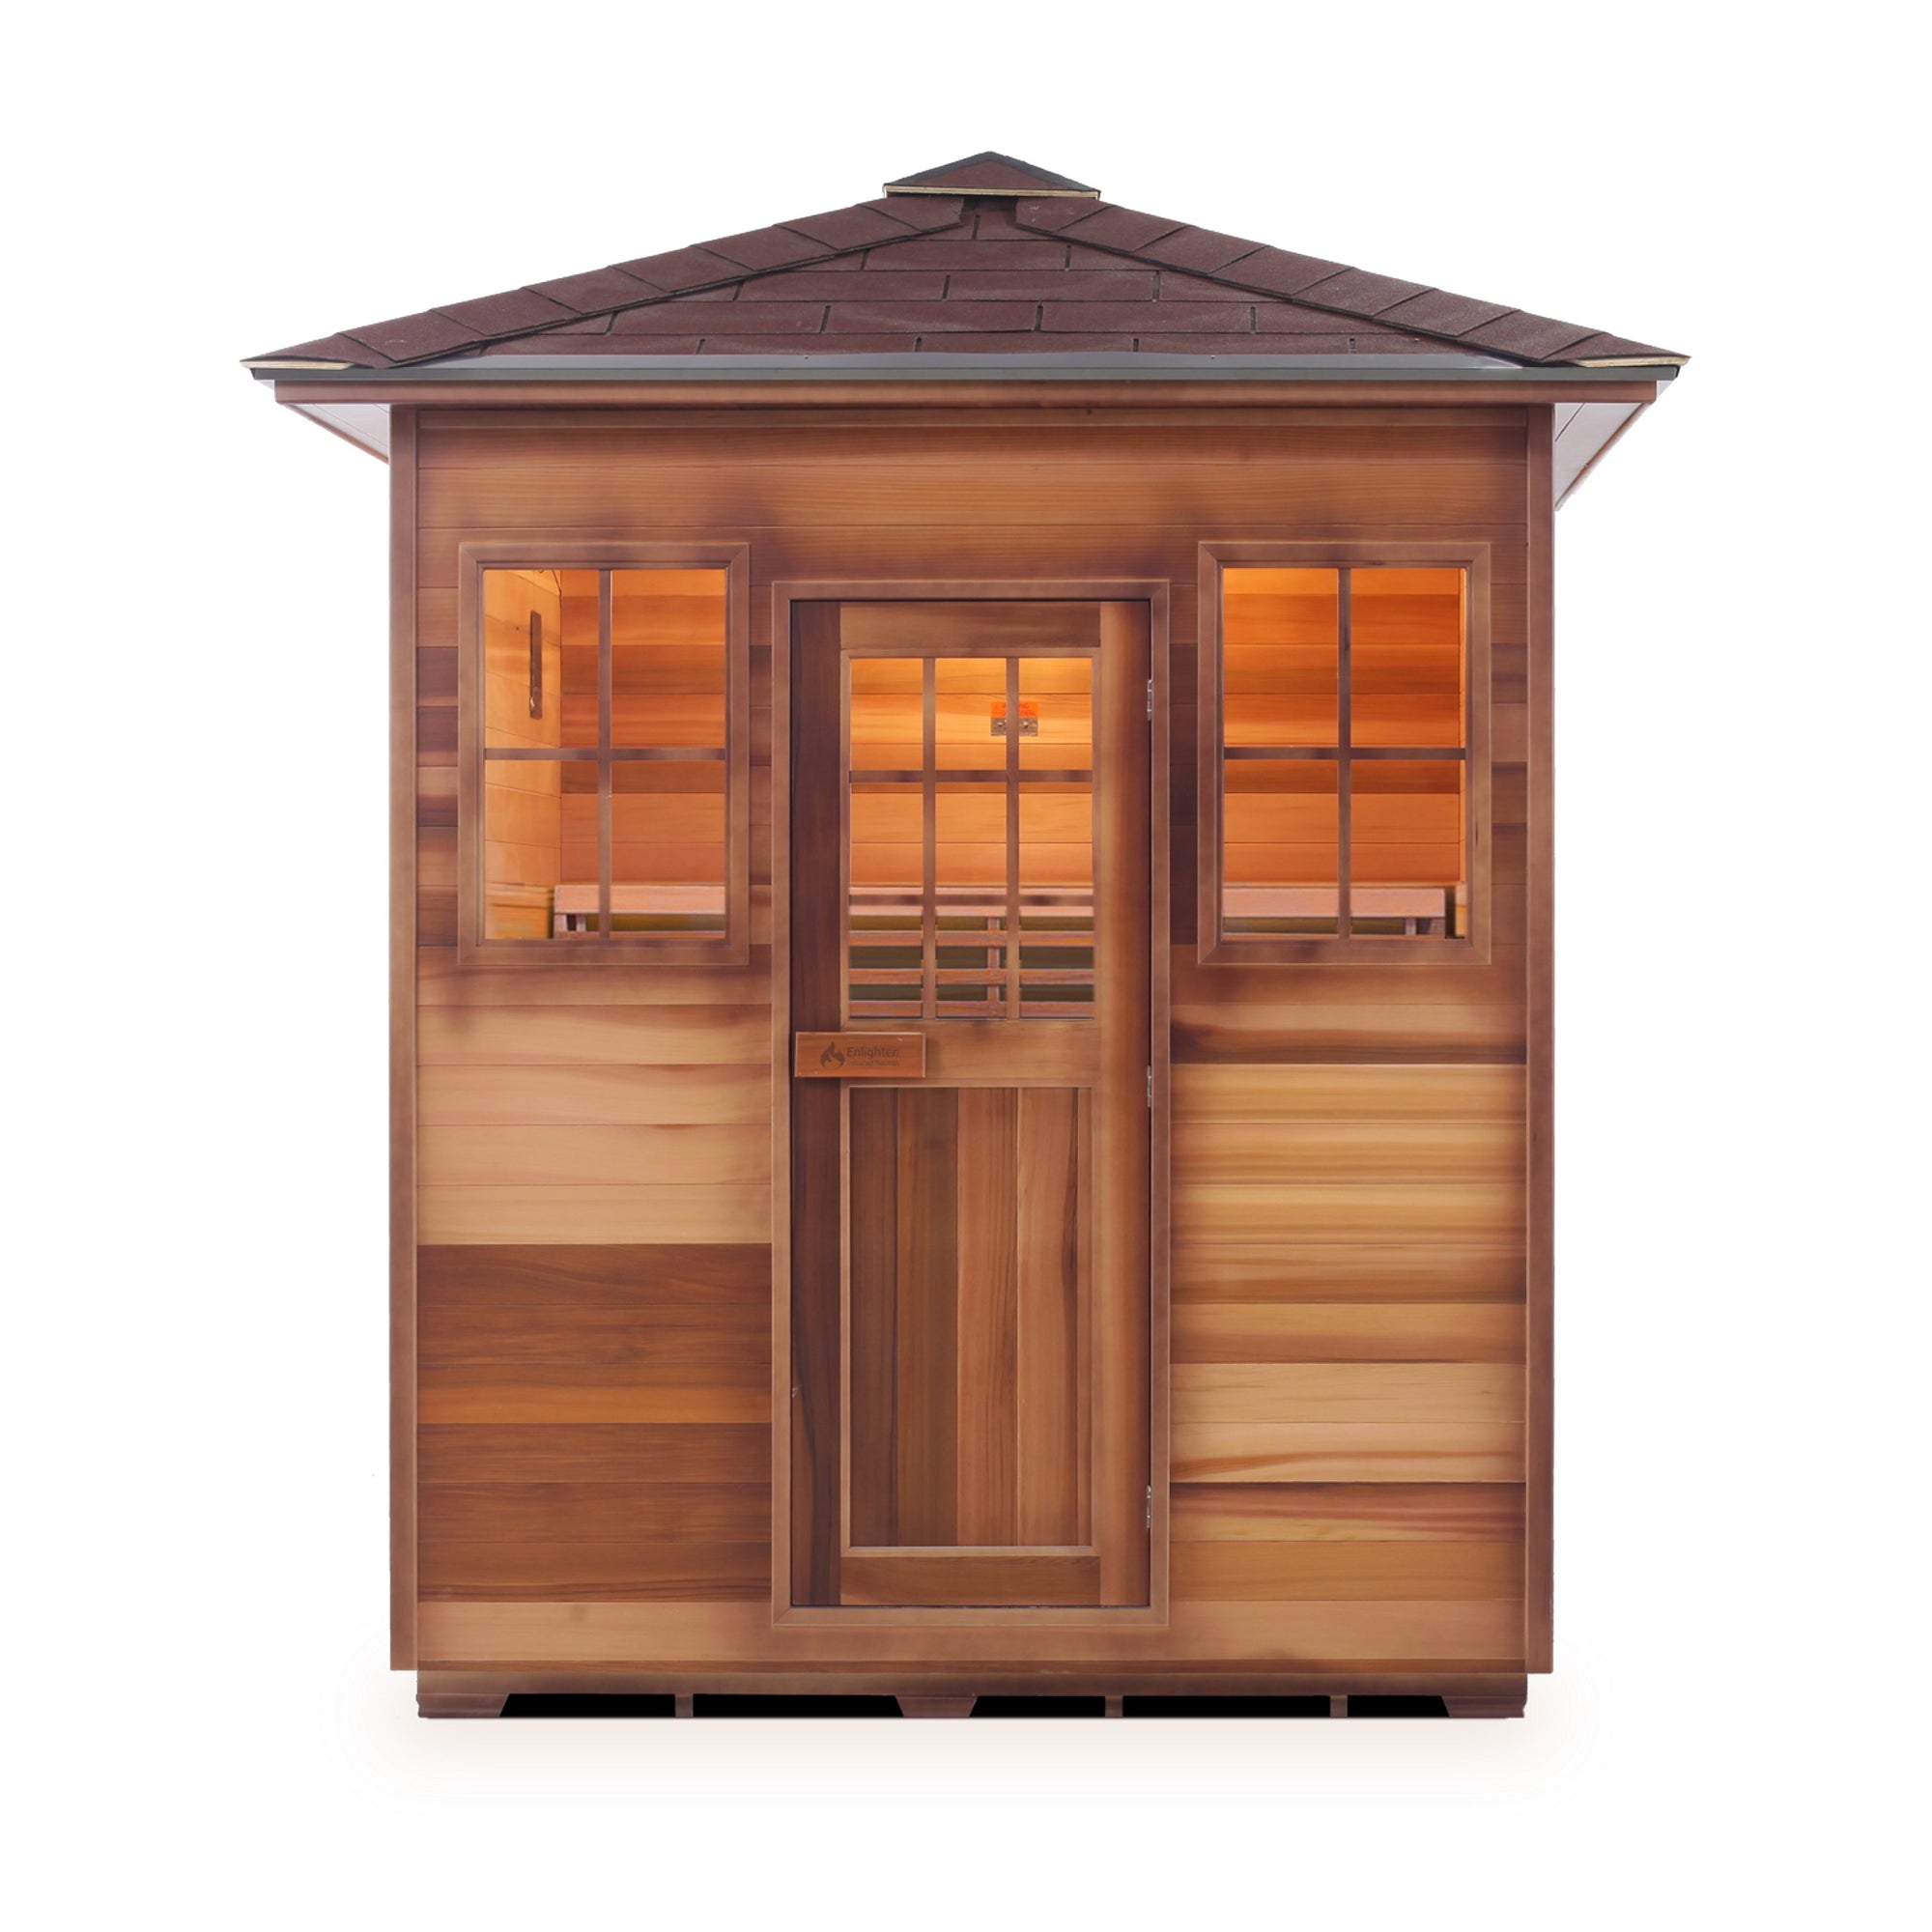 Enlighten sauna SaunaTerra Dry Traditional MoonLight 4 Person Outdoor Sauna Canadian Red Cedar Wood Outside And Inside Double Roof ( Flat Roof + peak roof) front view